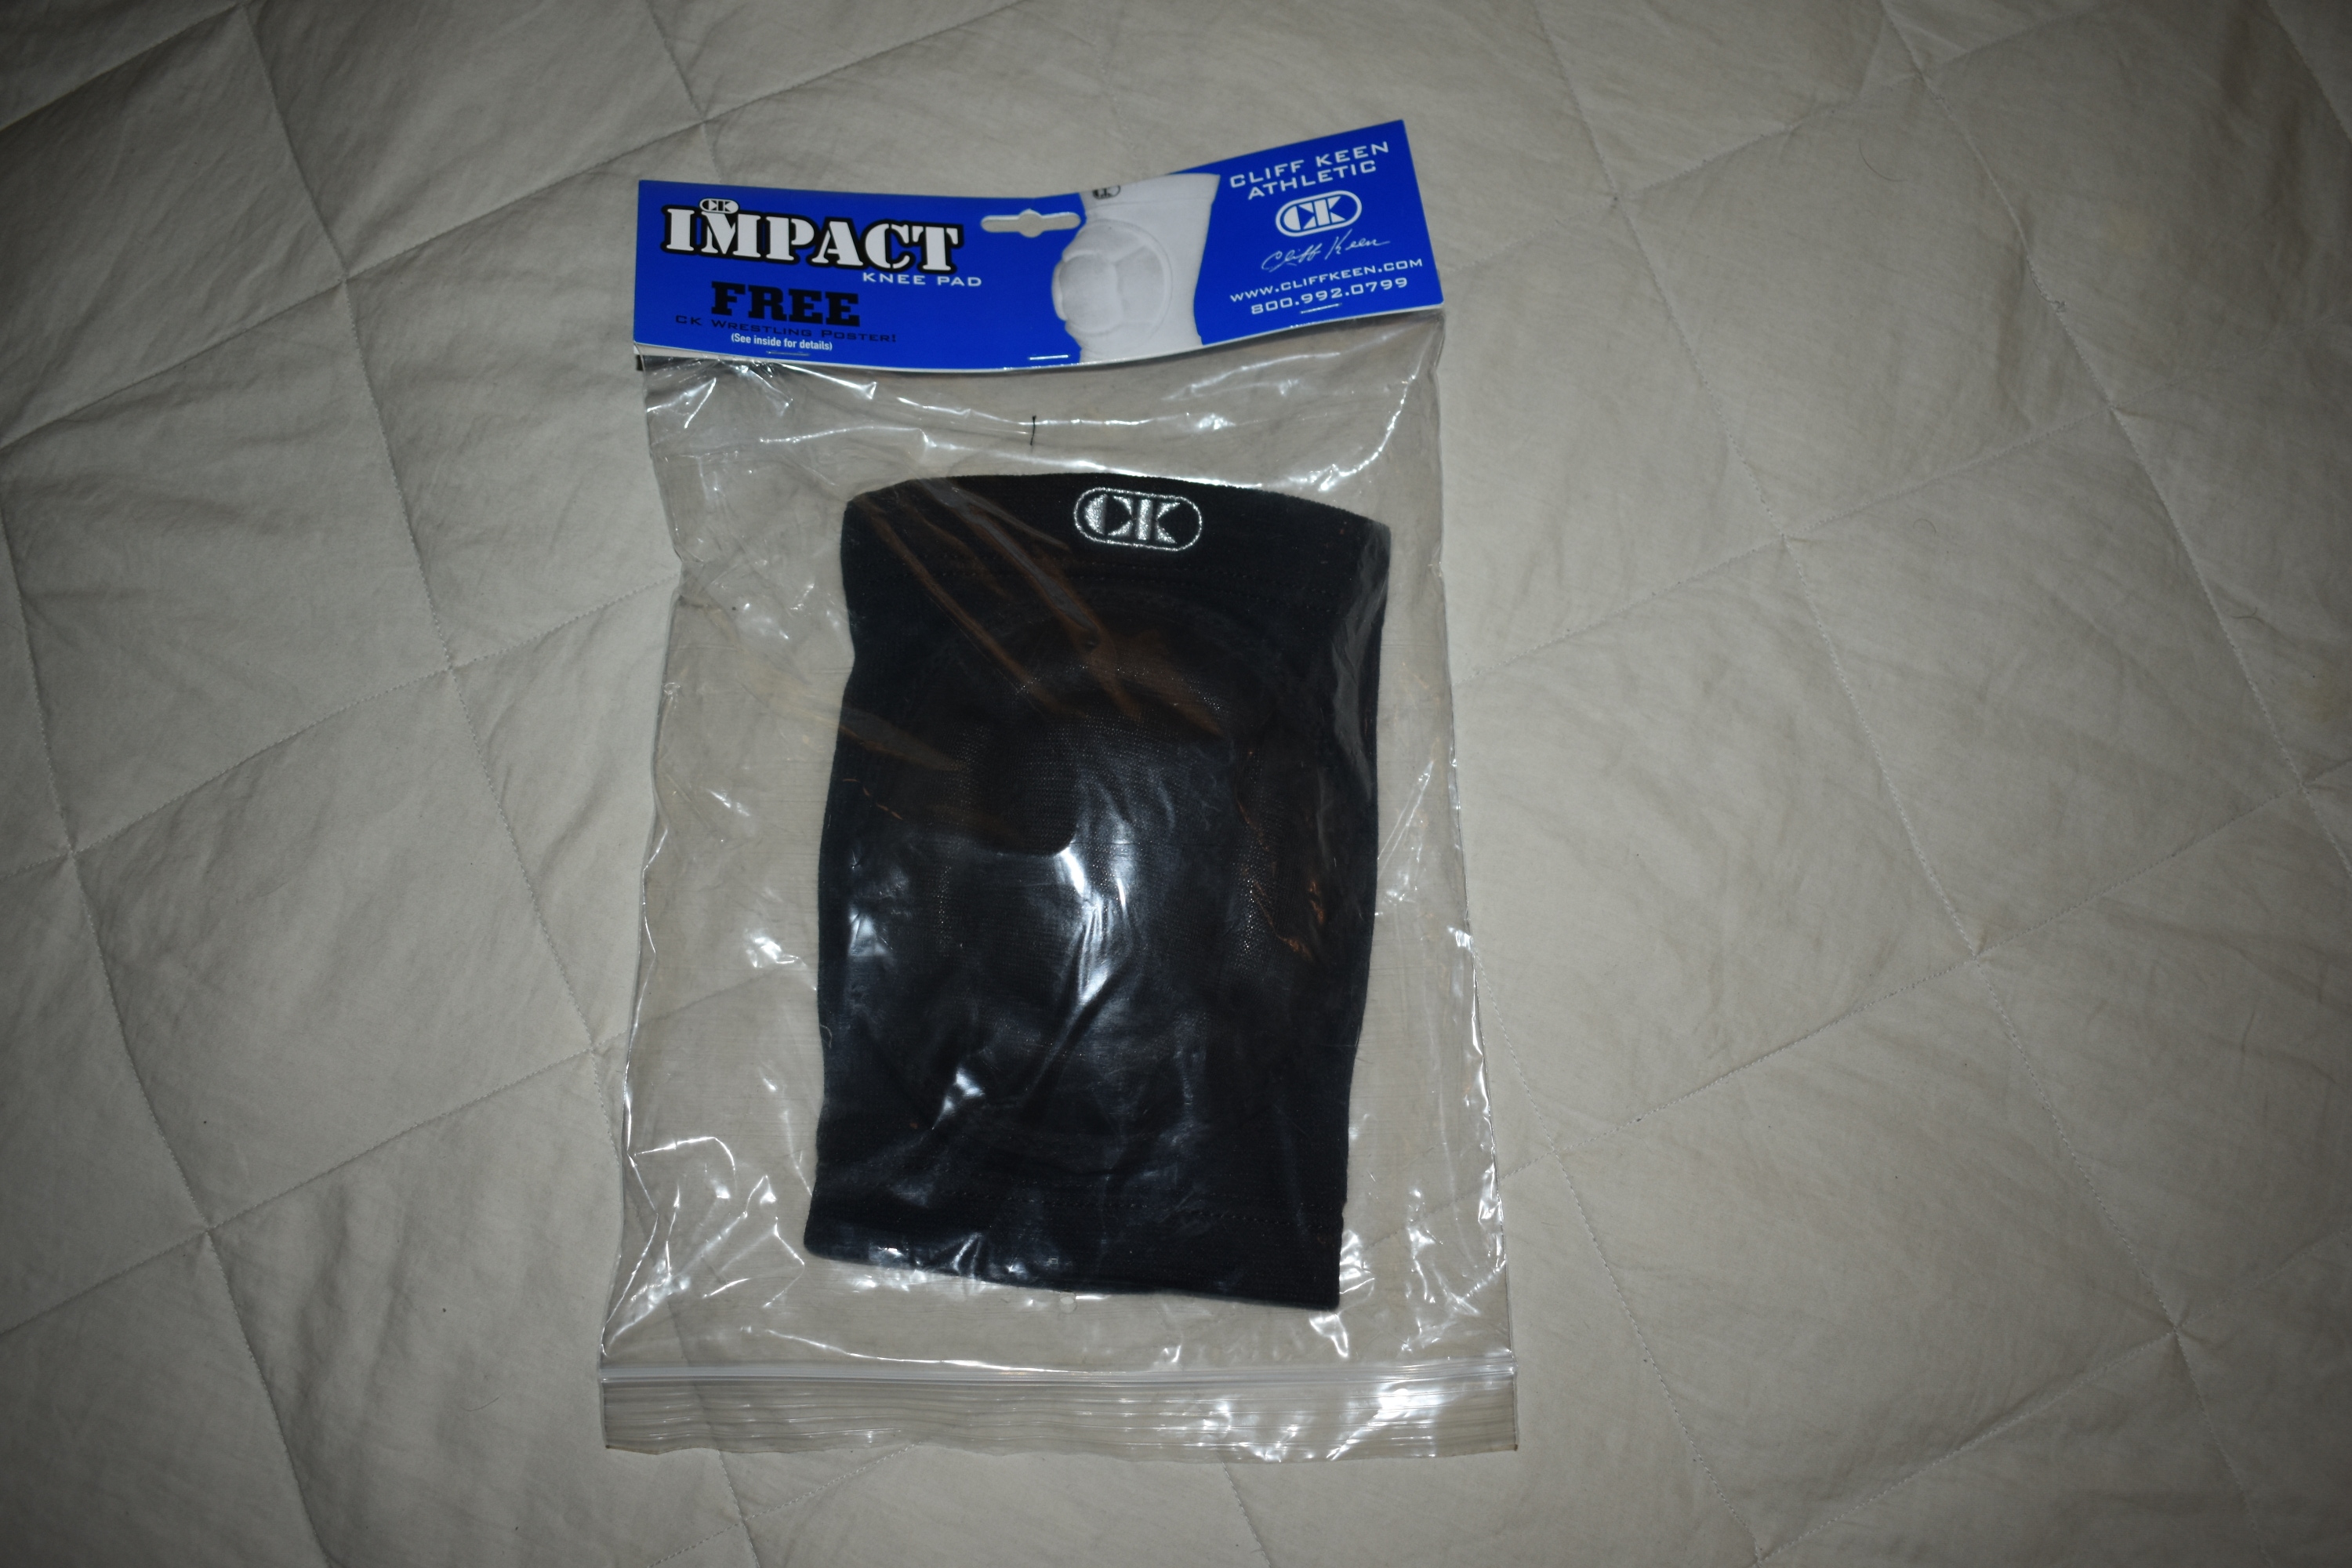 NEW - Cliff Keen Impact Knee Pad, Black, One Size